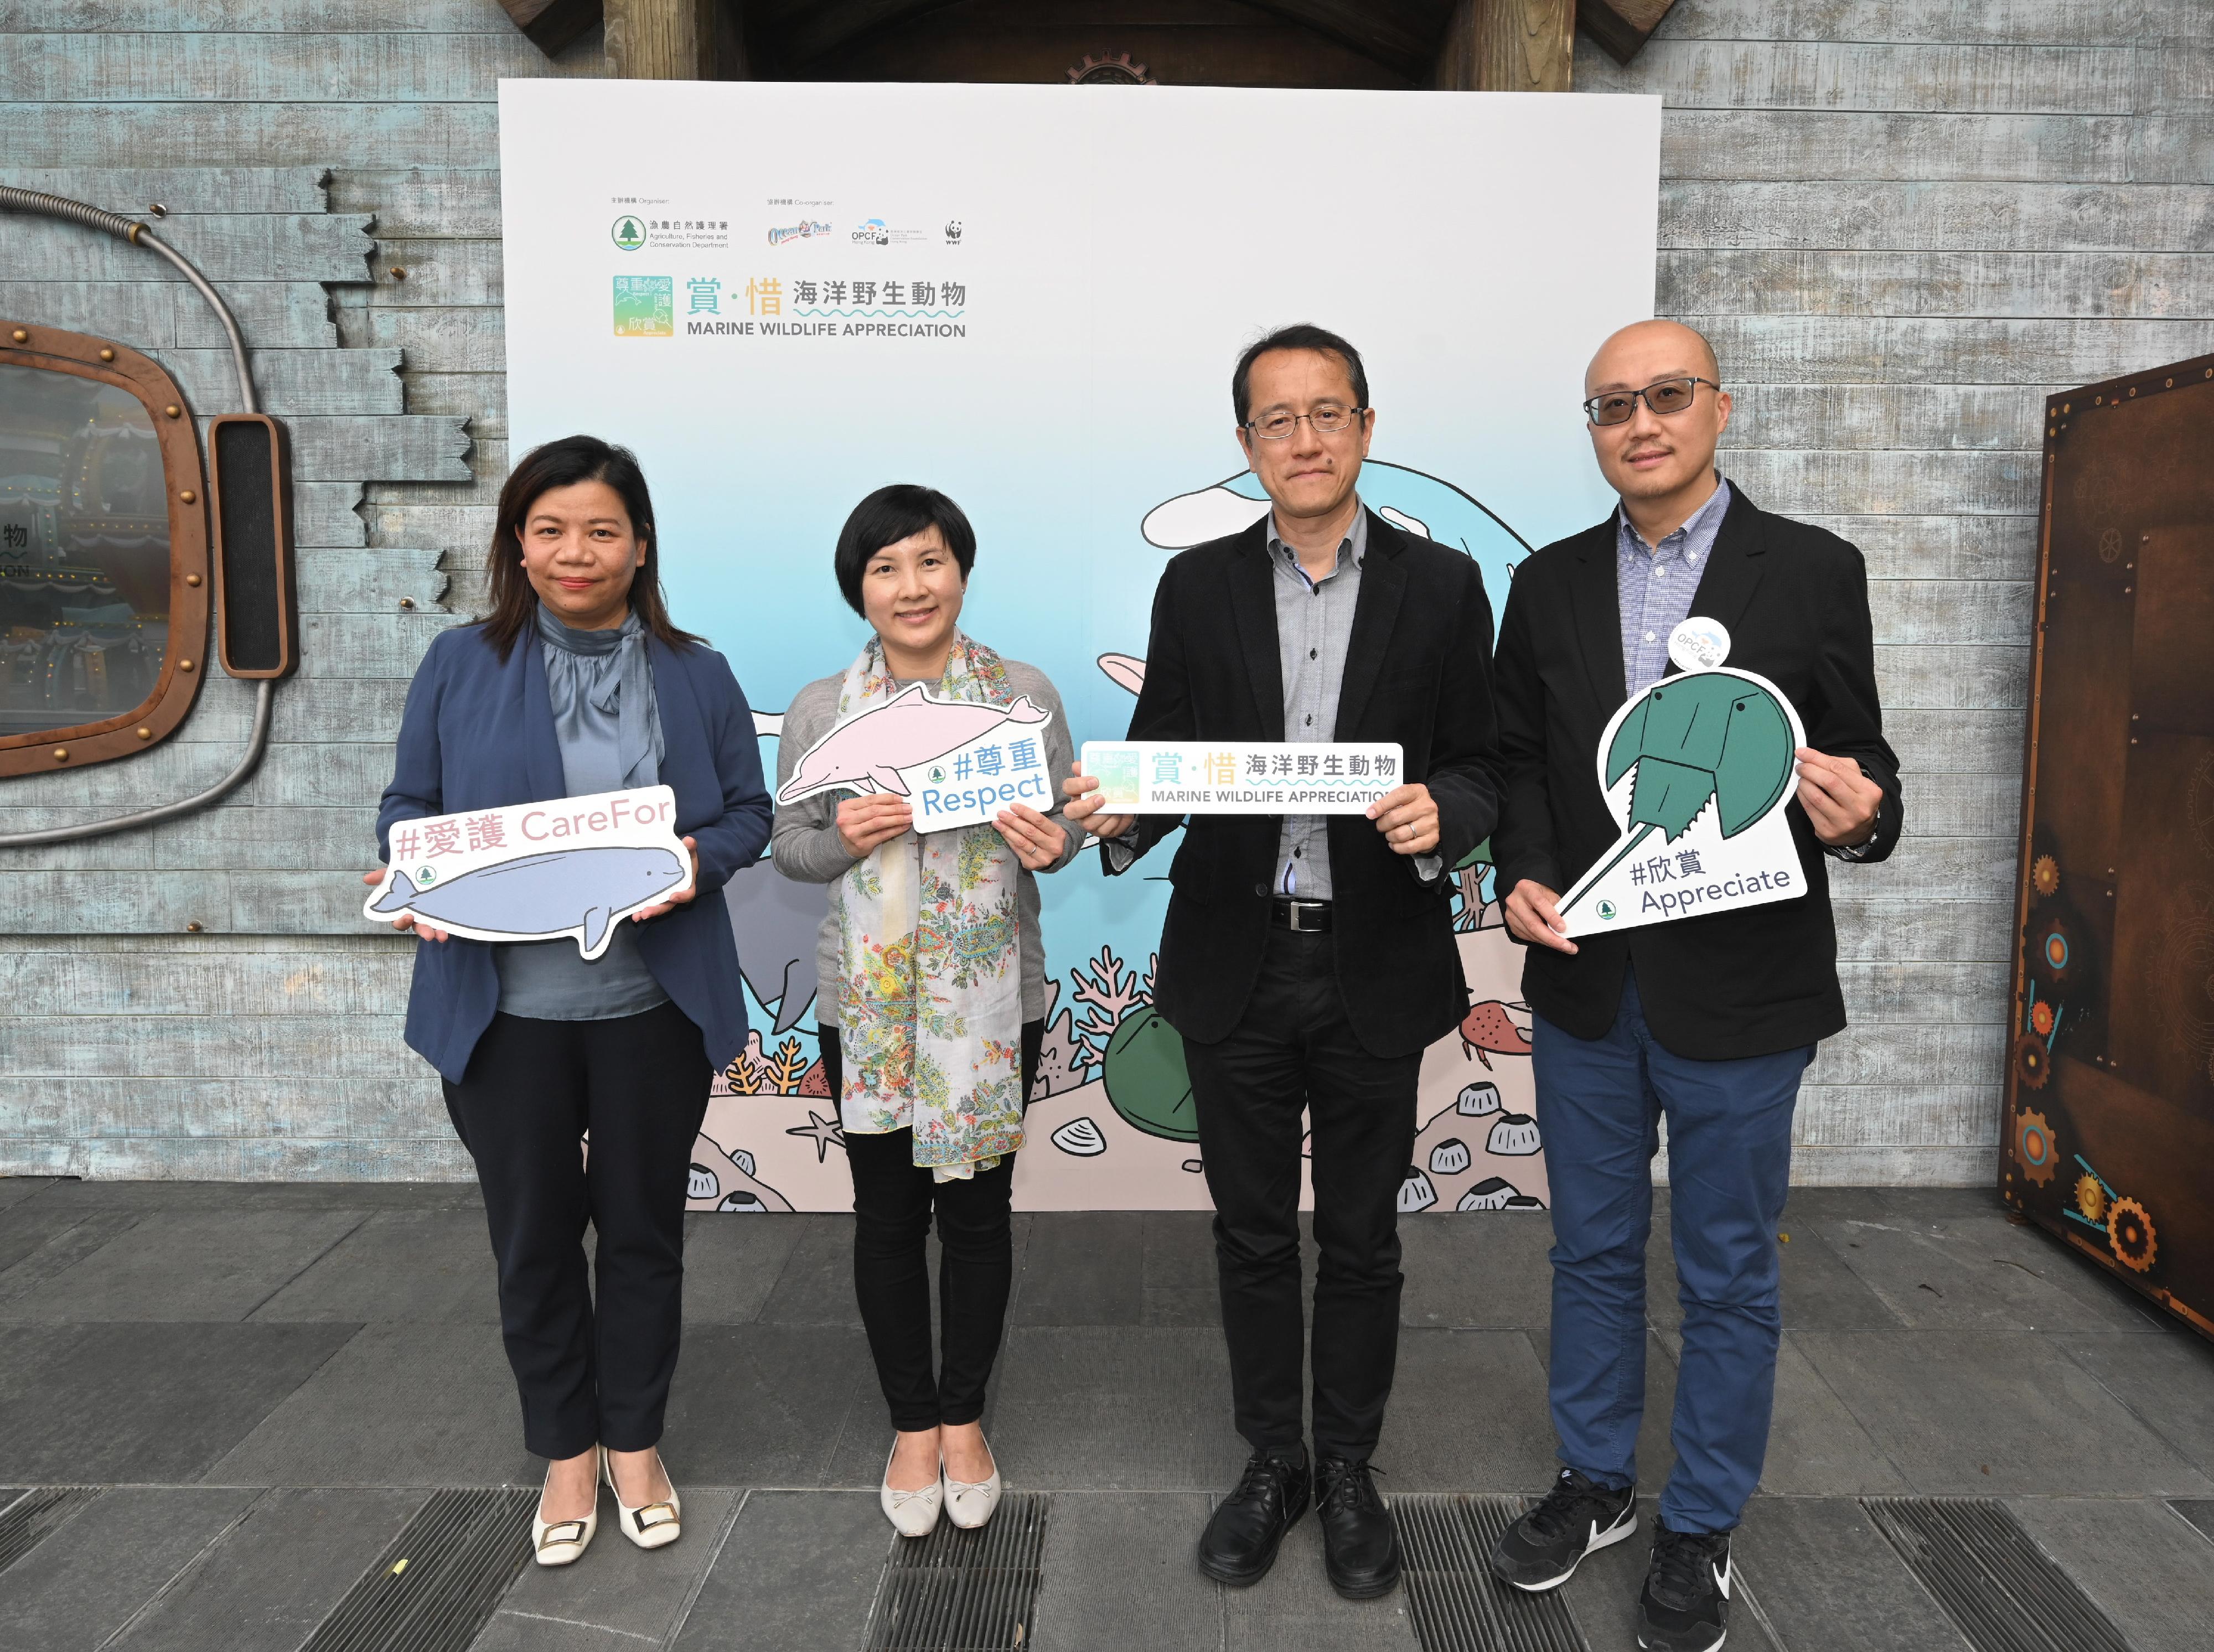 The Marine Wildlife Appreciation Festival organised by the Agriculture, Fisheries and Conservation Department (AFCD) was launched today (January 11), with a view to promoting respect, care, and appreciation for marine wildlife among the public. Photo shows the AFCD Assistant Director (Fisheries and Marine Conservation), Mr Patrick Lai (second right), and representatives of co-organisers of the Festival officiating at the kick-off ceremony.